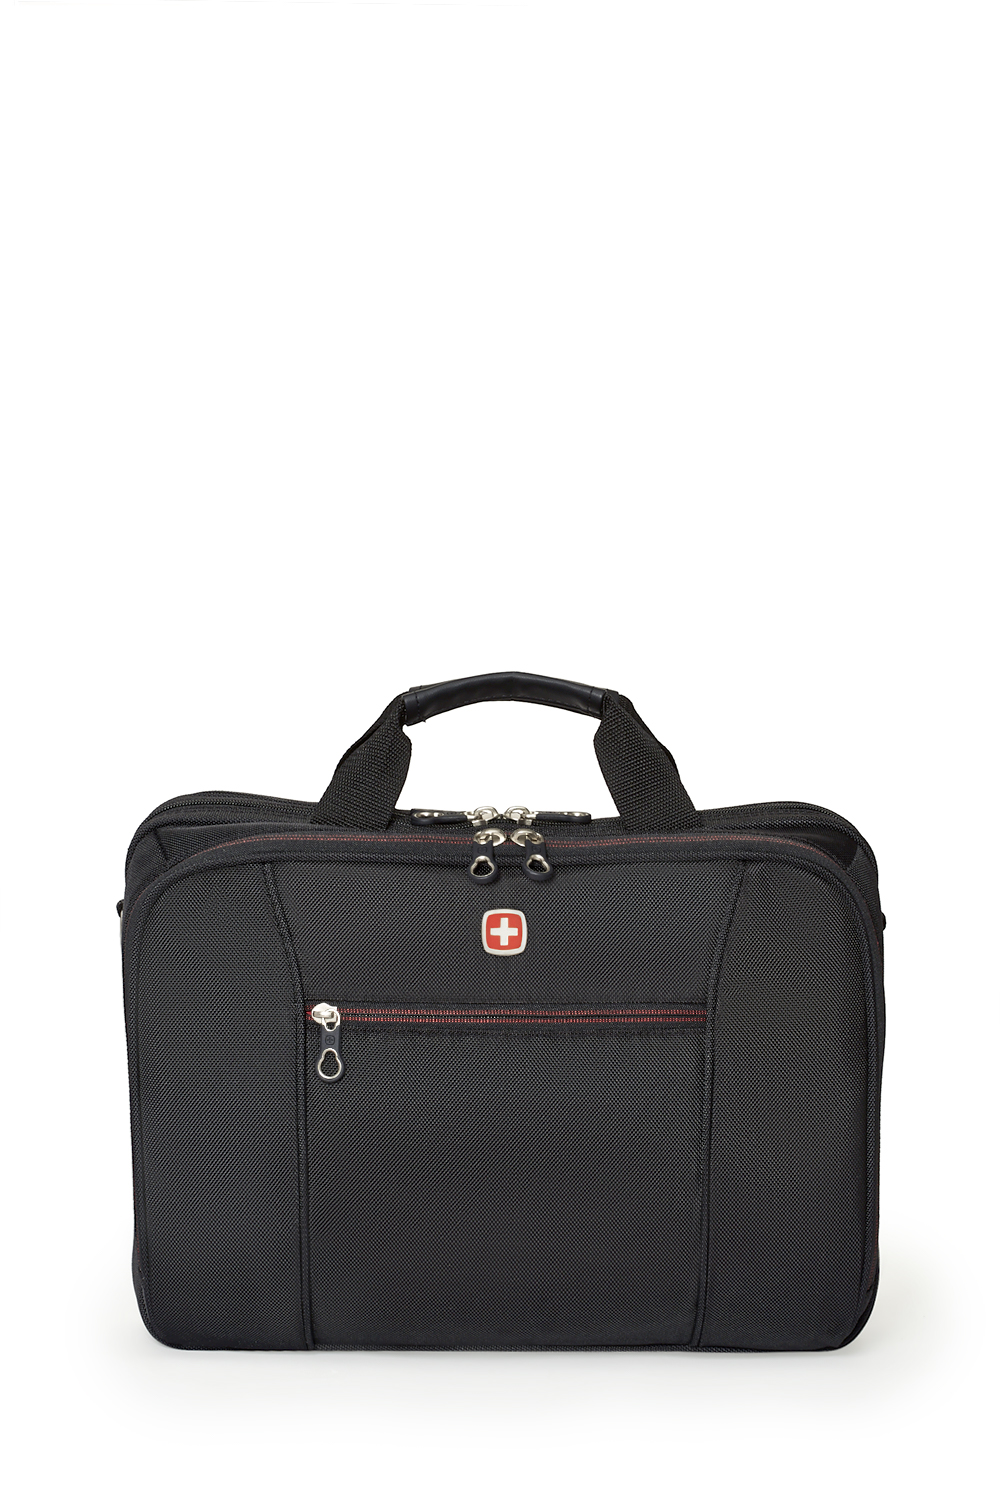 Briefcases & Business Cases | SWISSGEAR Canada